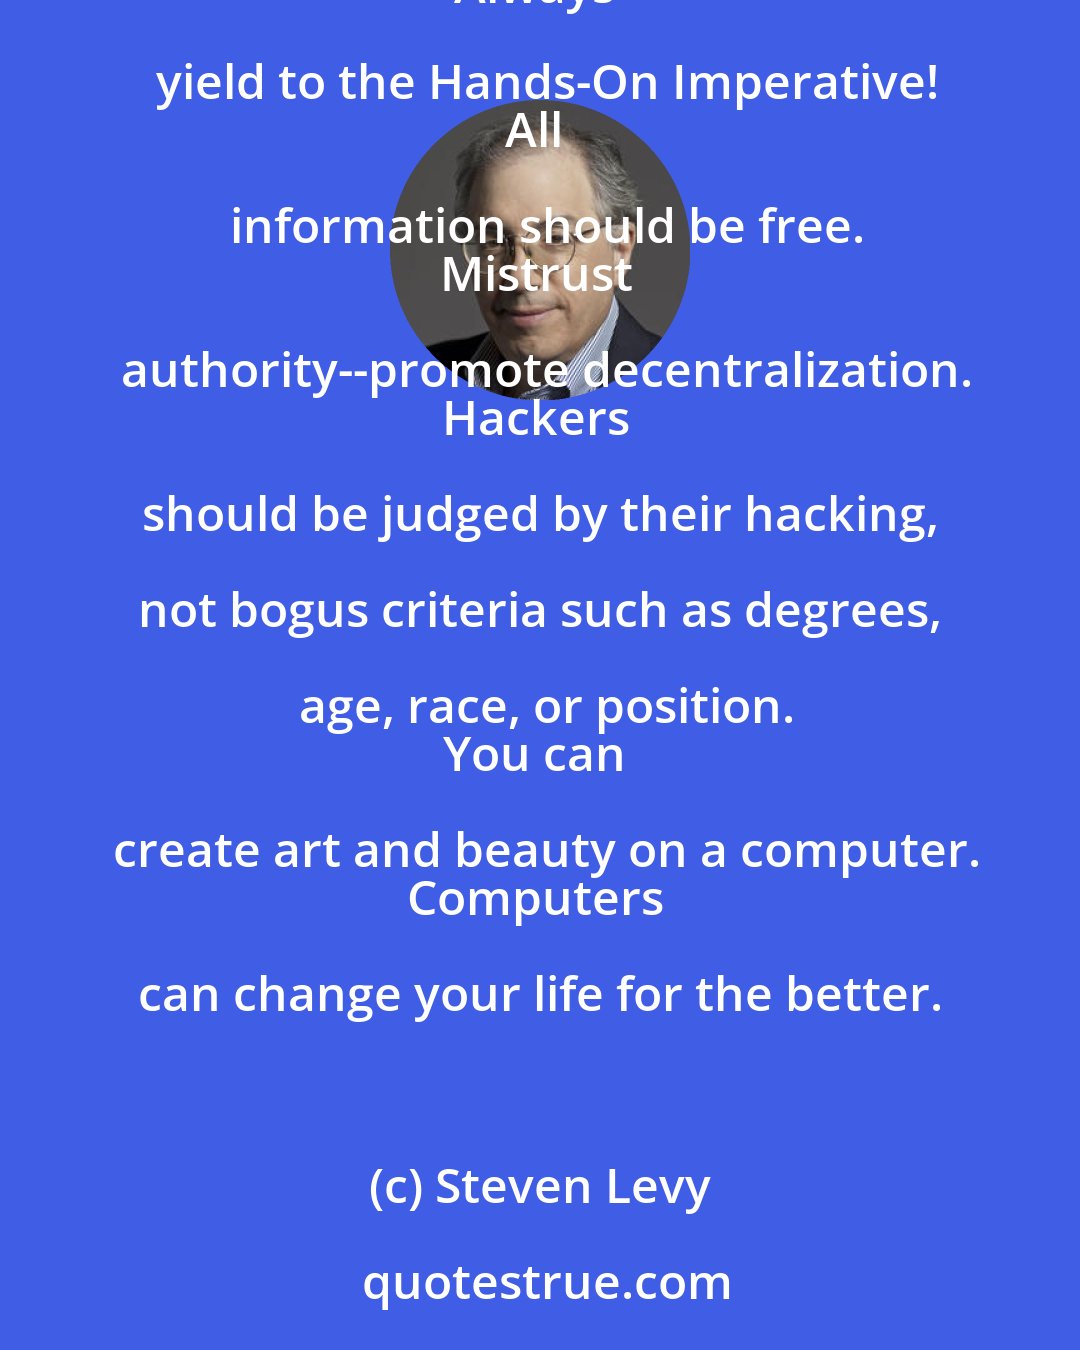 Steven Levy: The Hacker Ethic: Access to computers--and anything which might teach you something about the way the world works--should be unlimited and total.
Always yield to the Hands-On Imperative!
All information should be free.
Mistrust authority--promote decentralization.
Hackers should be judged by their hacking, not bogus criteria such as degrees, age, race, or position.
You can create art and beauty on a computer.
Computers can change your life for the better.